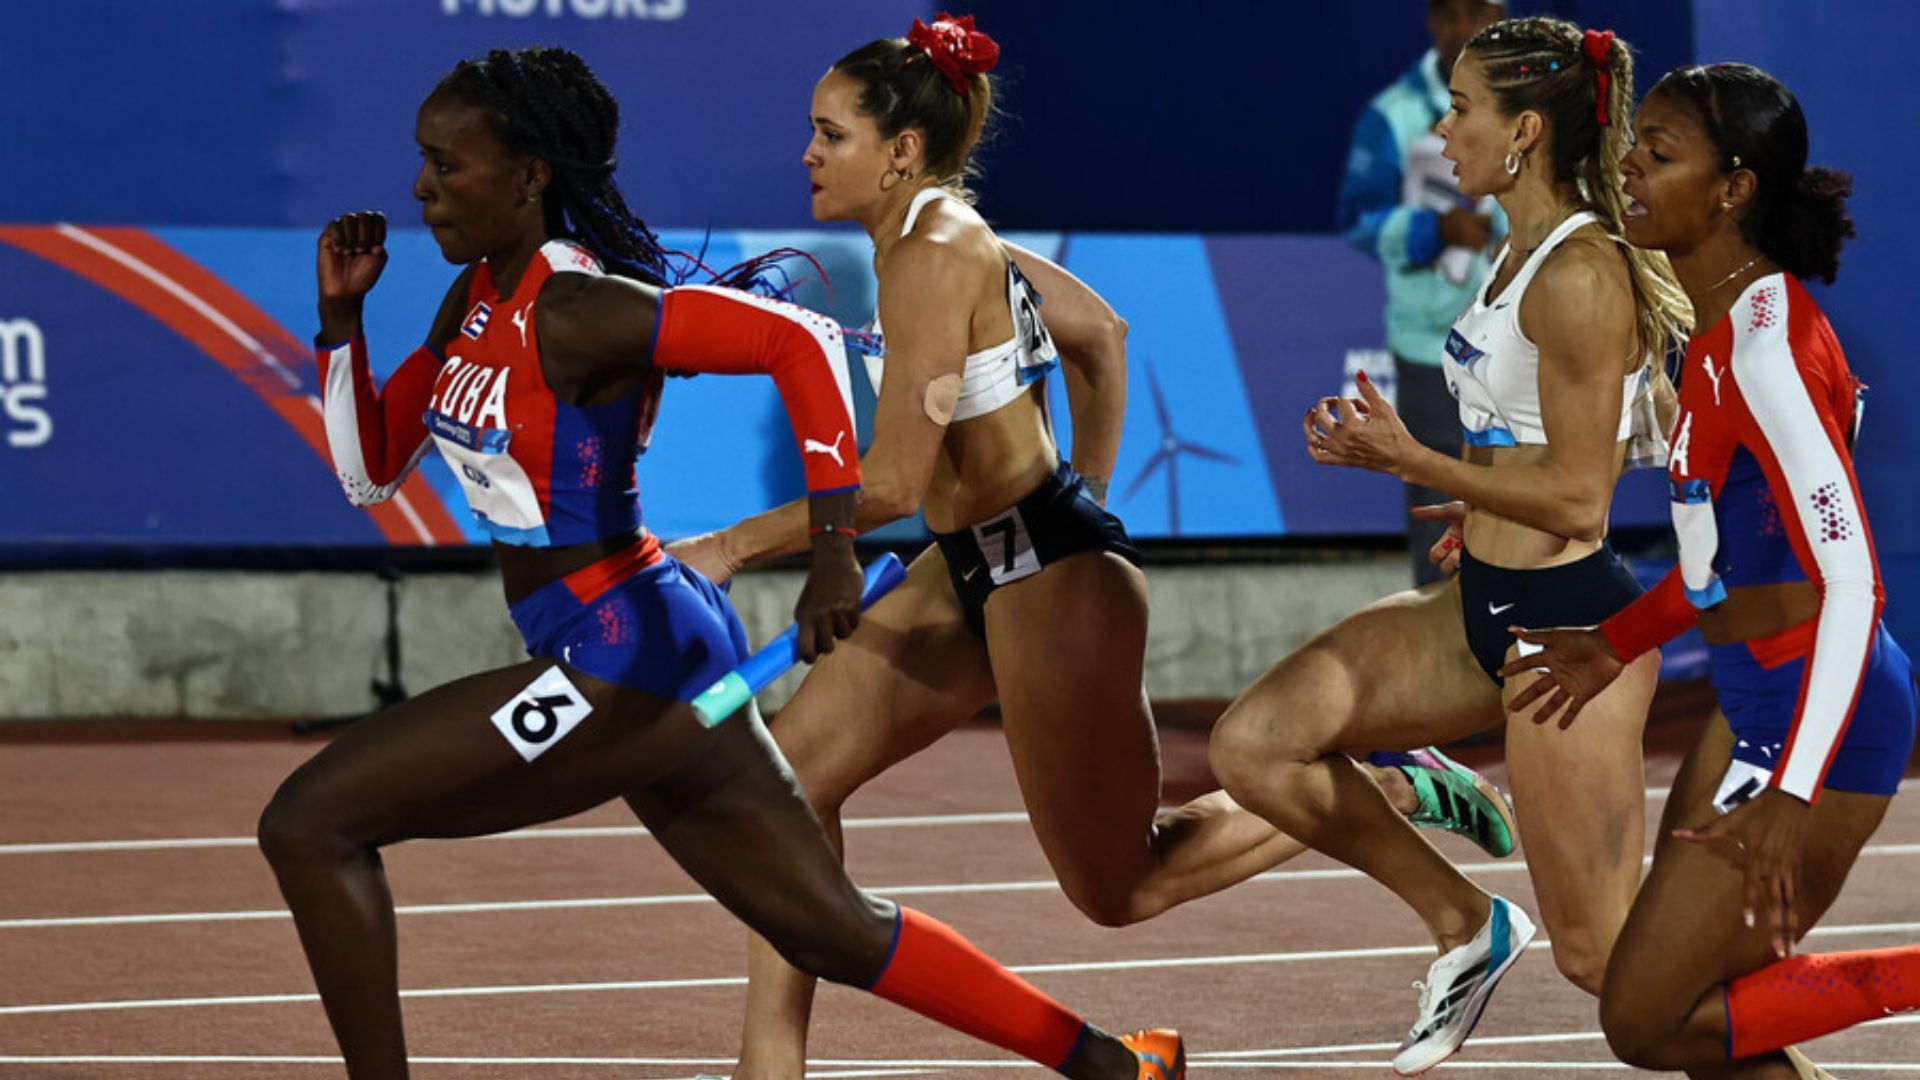 Cuba celebrates gold, and Chile, silver in the women's 4x100 relay